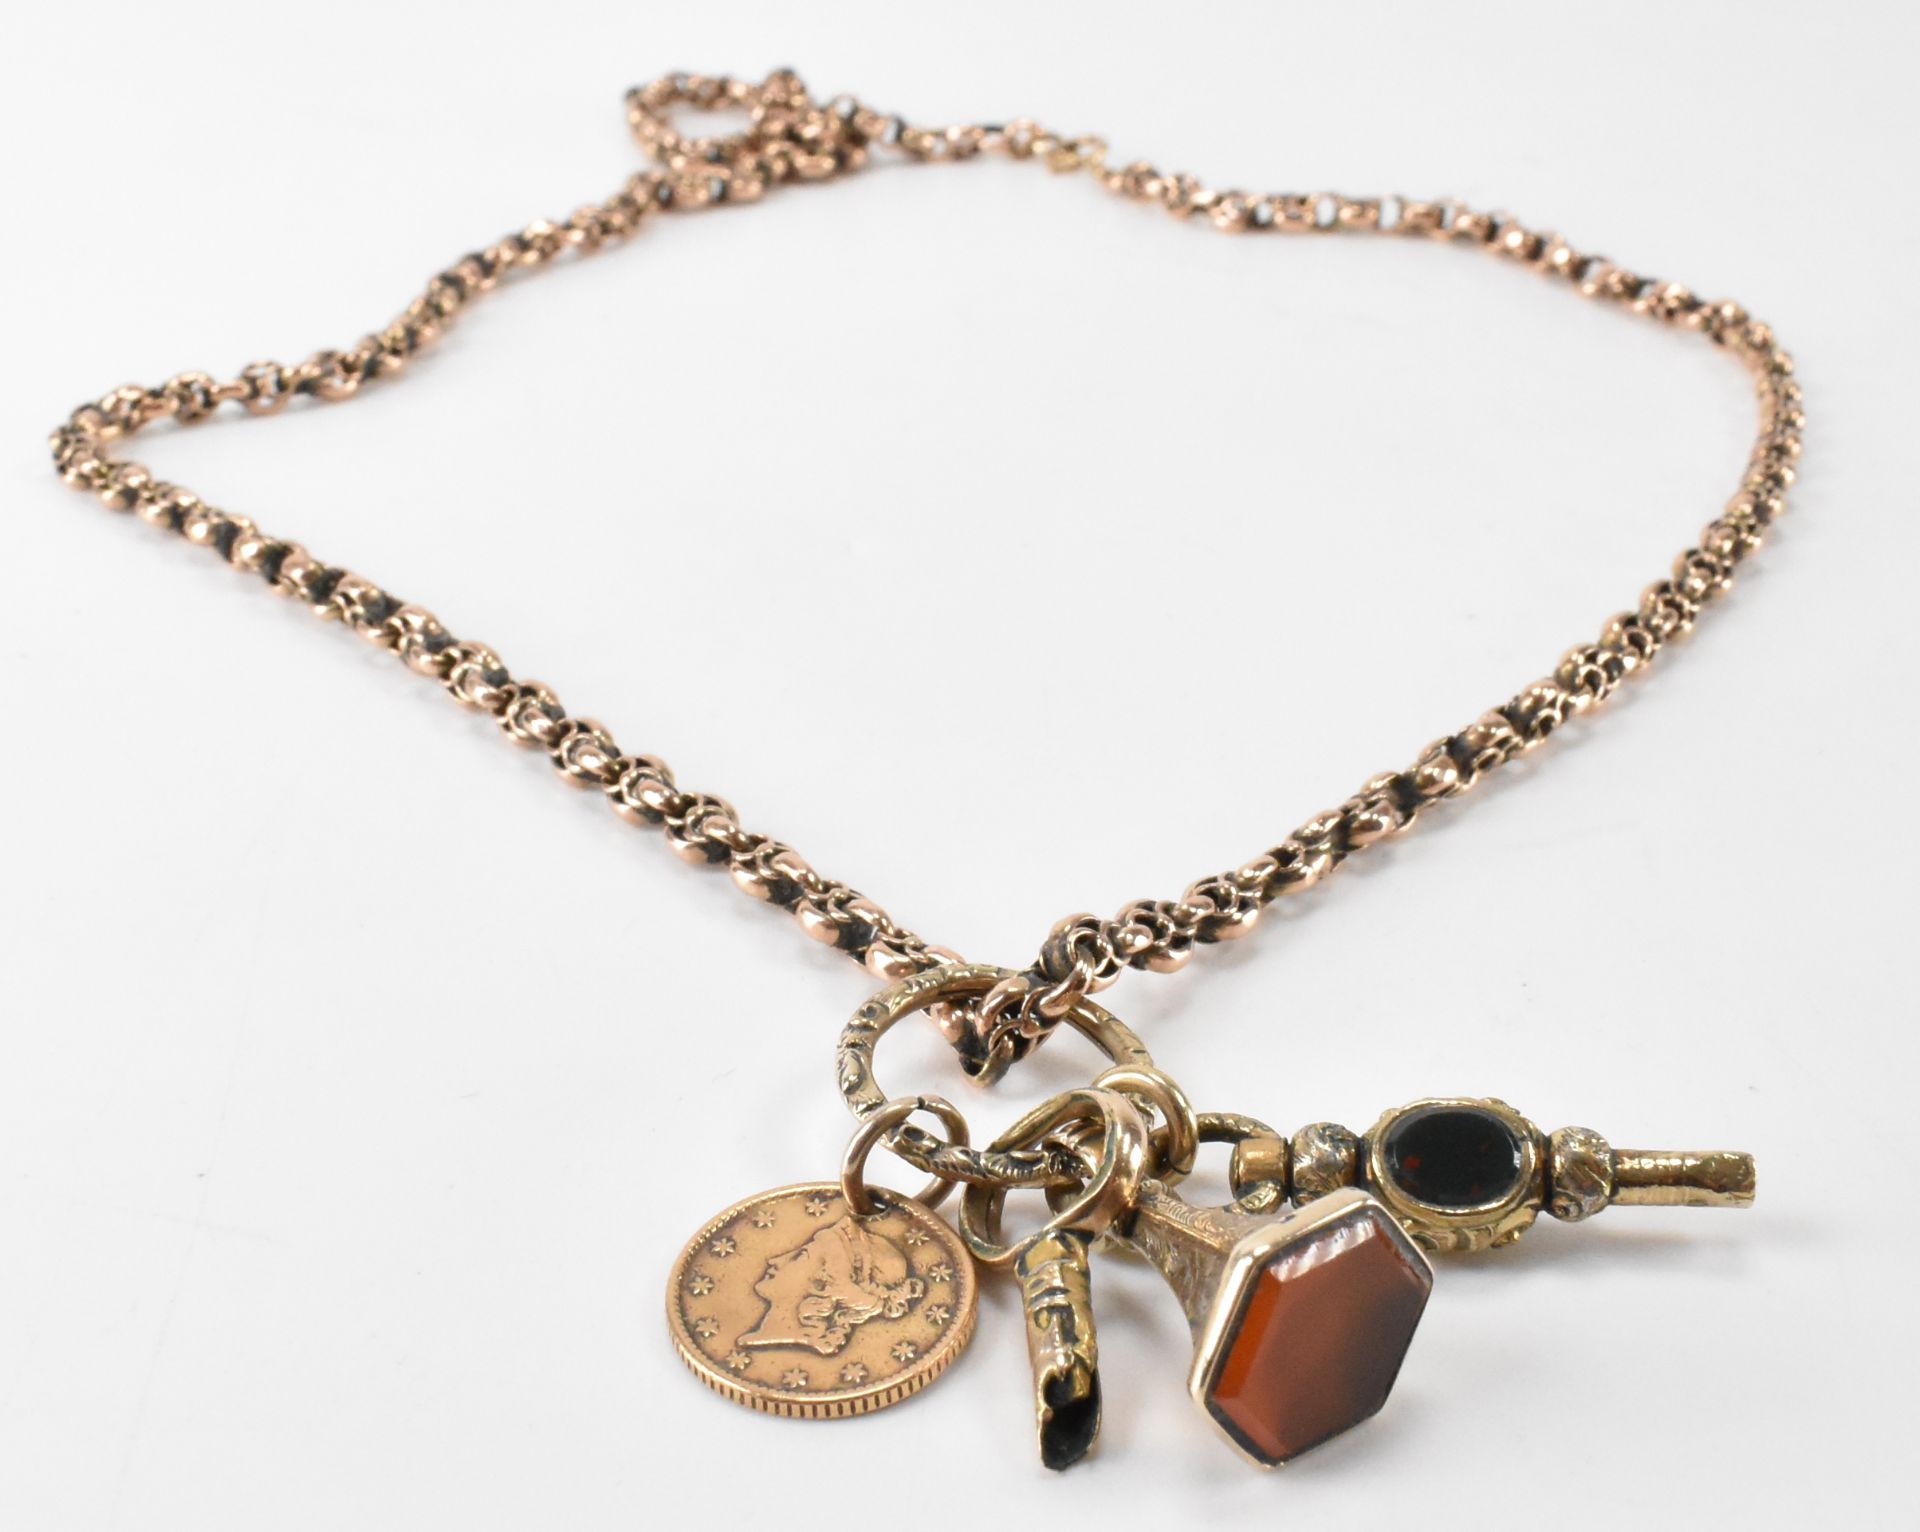 VICTORIAN POCKET WATCH CHAIN NECKLACE - Image 5 of 6